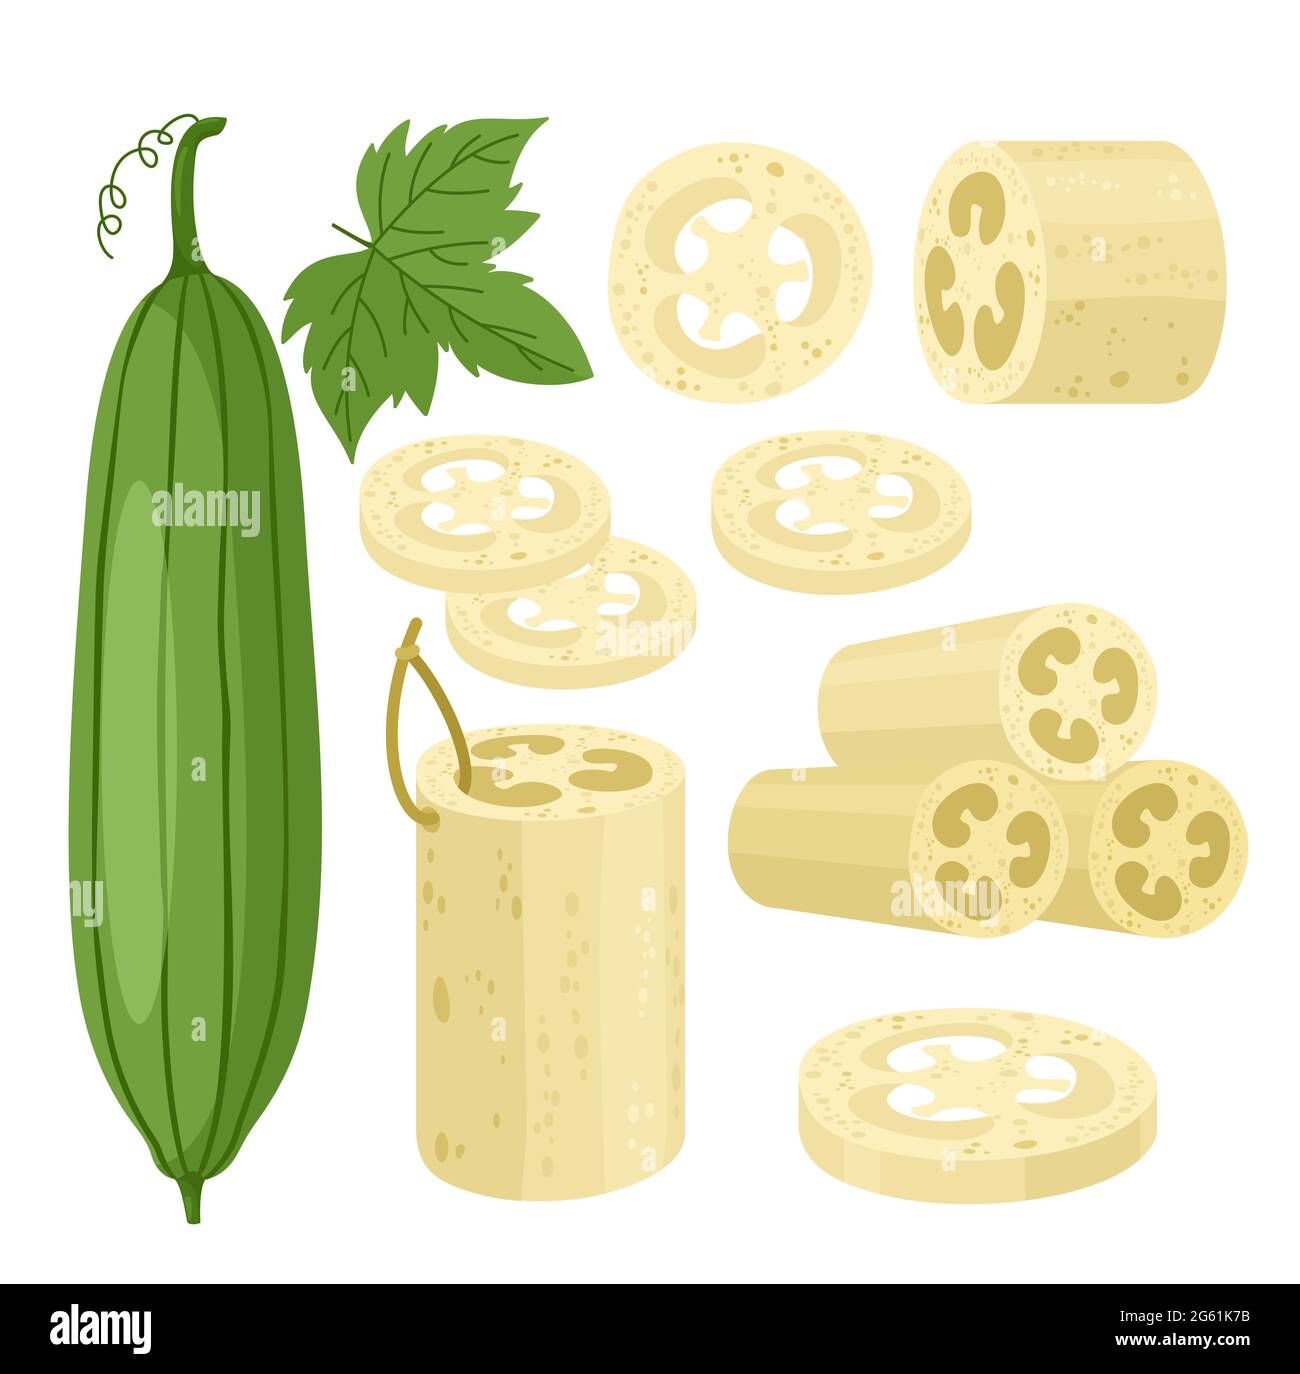 Cartoon flat loofa collection with organic bath accessory for scrub body skincare, natural agricultural green luffa fruit and leaves icons isolated on Stock Vector